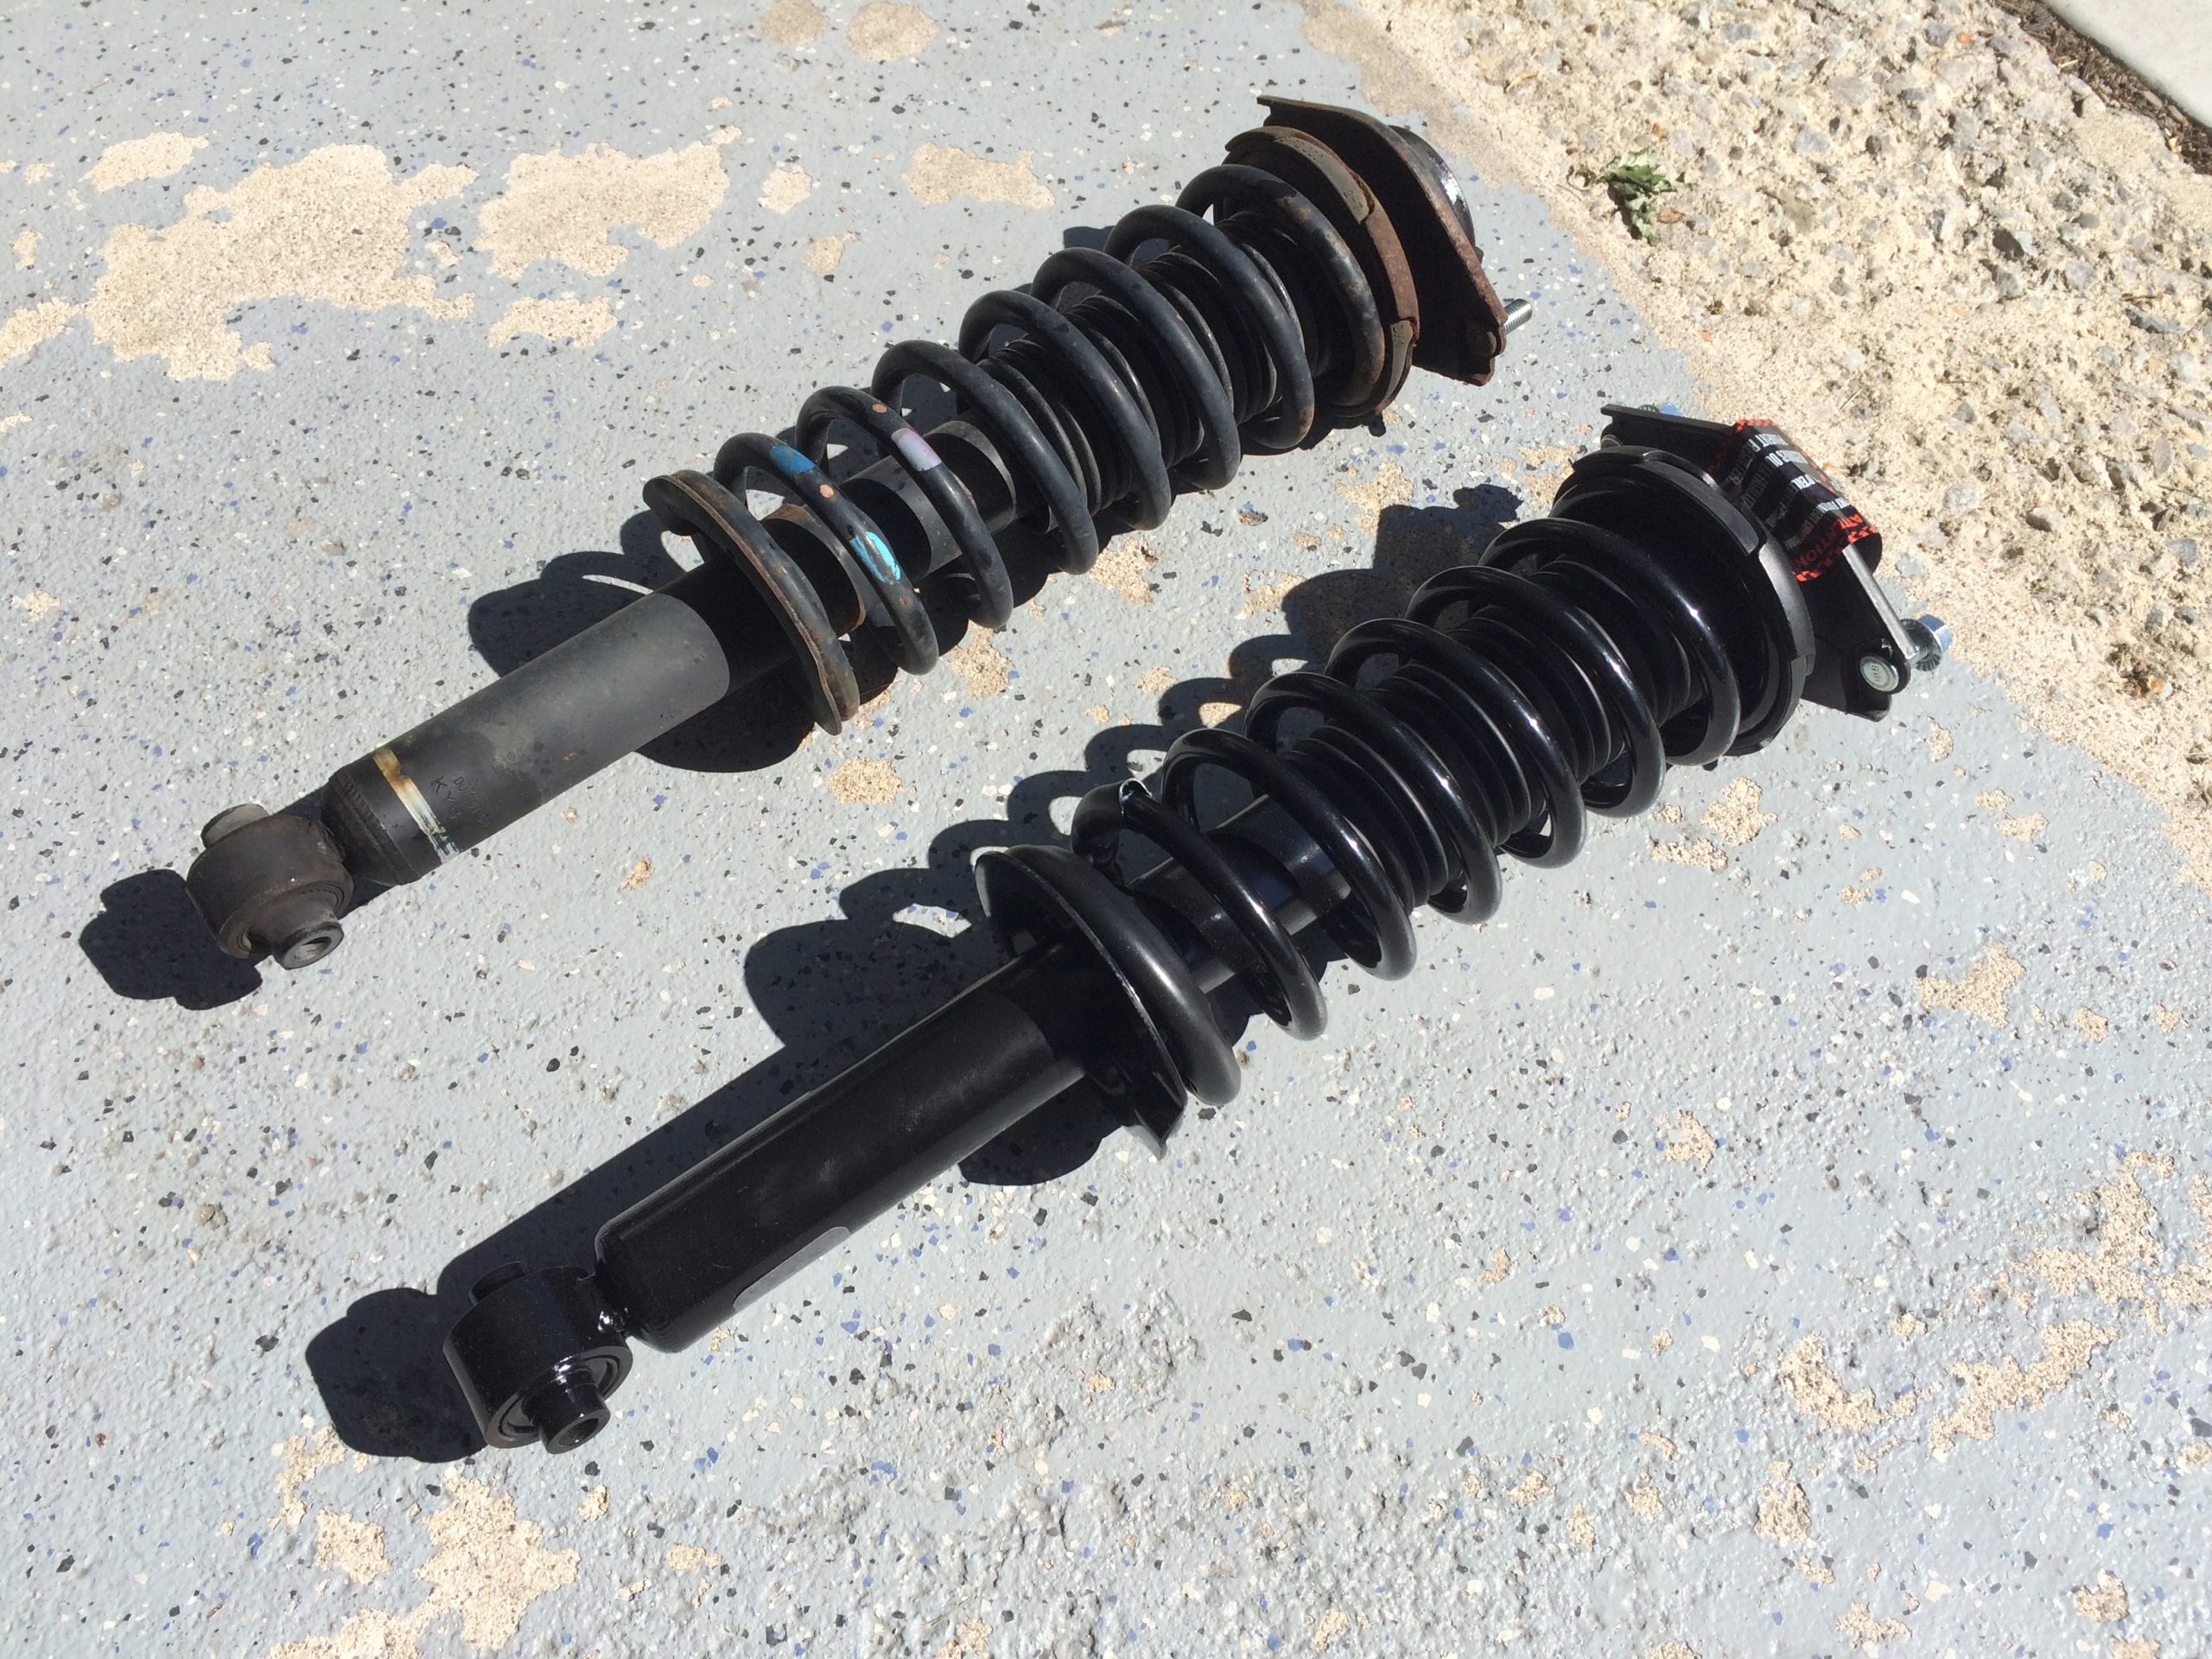 Car Shock Absorbers: What You Need to Know & Signs They Are Worn Out